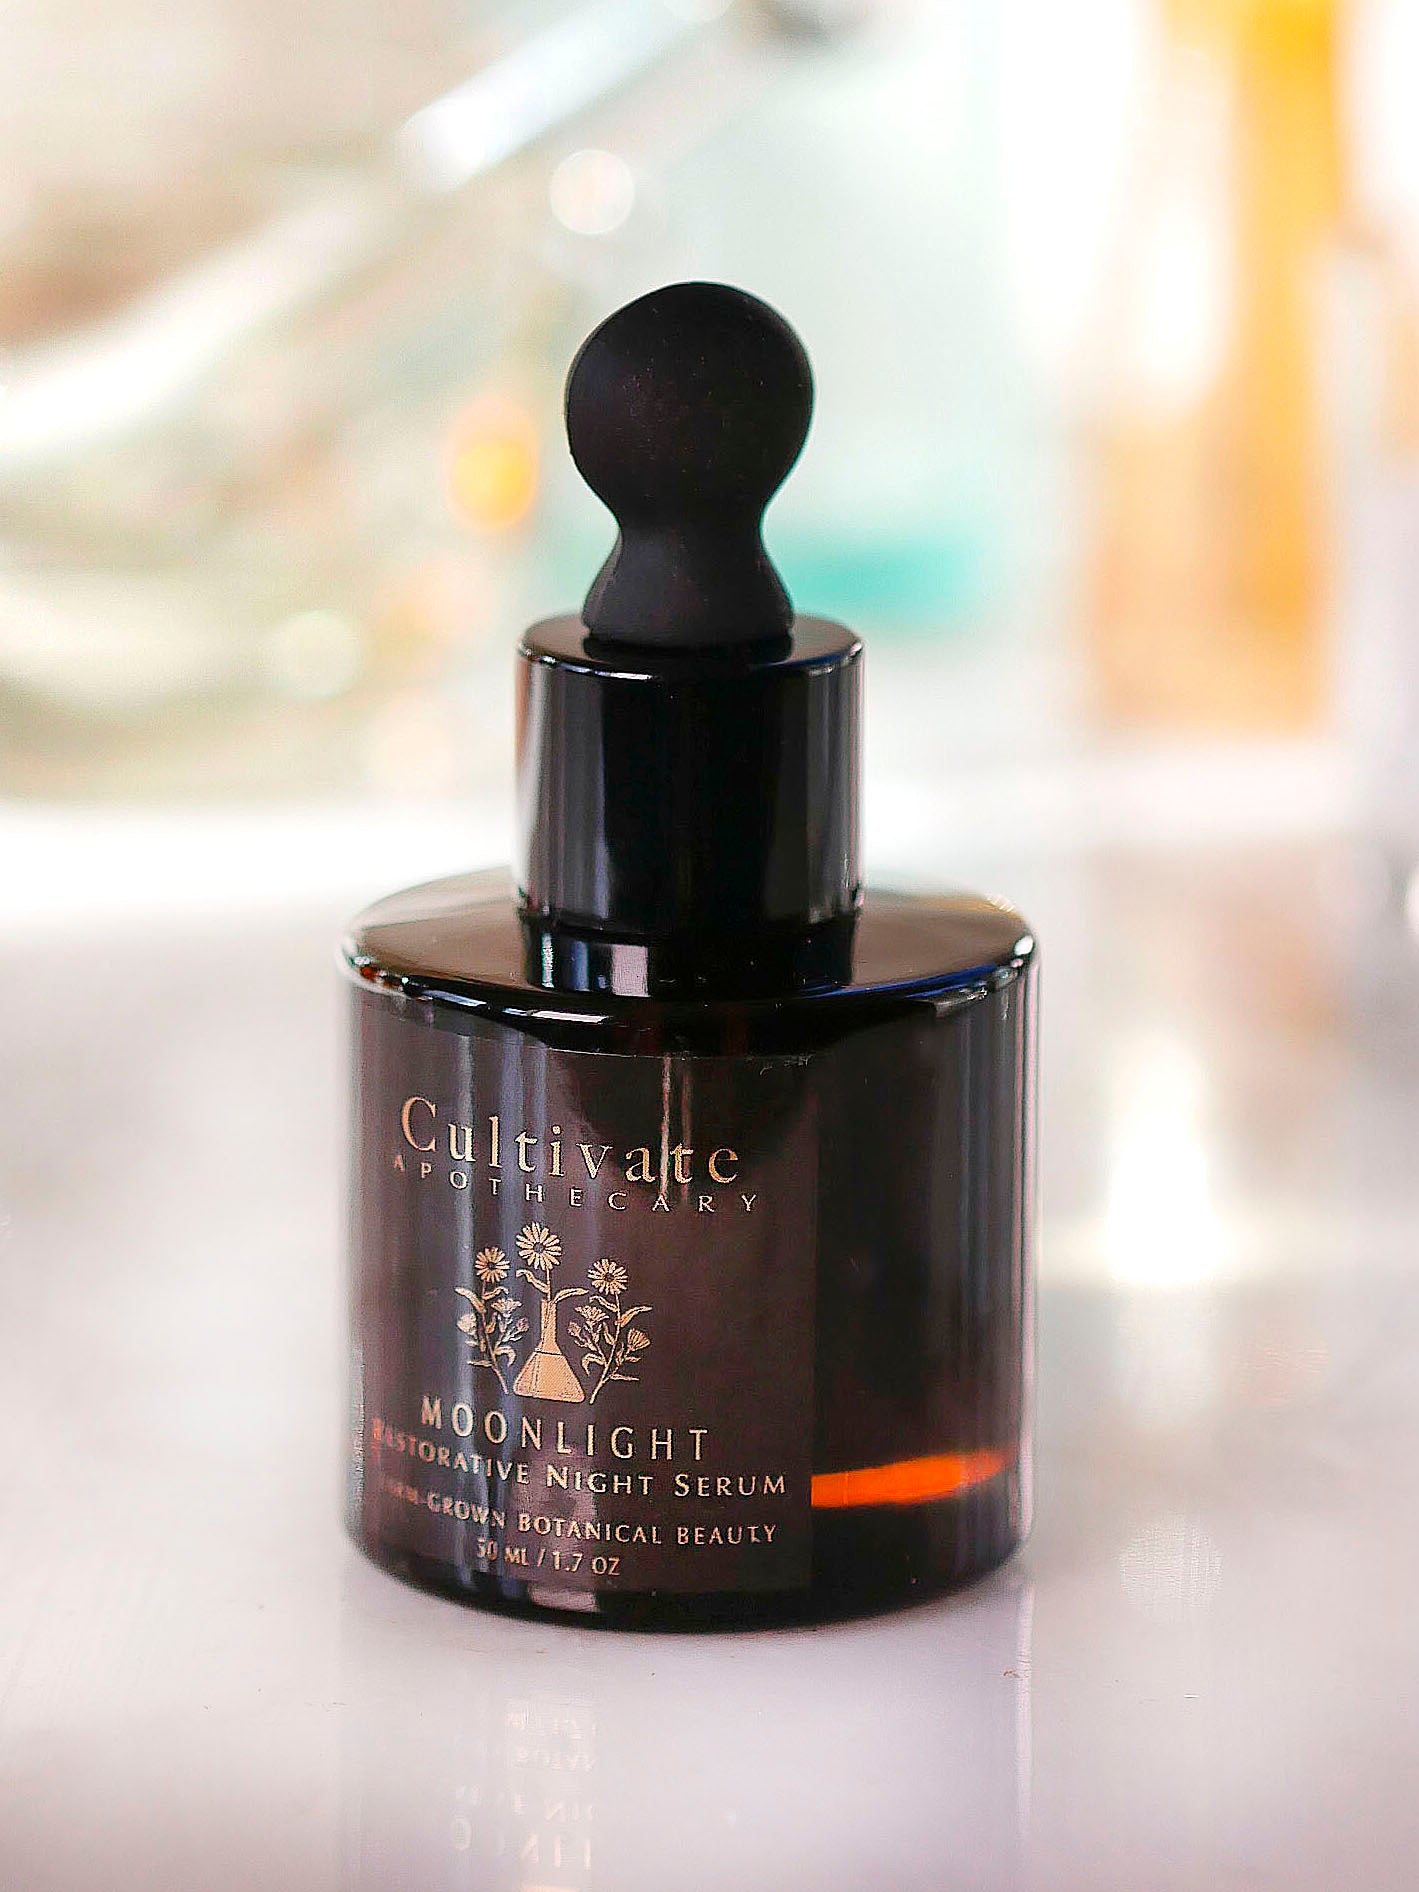 Night face serum for dry skin by Cultivate Apothecary.